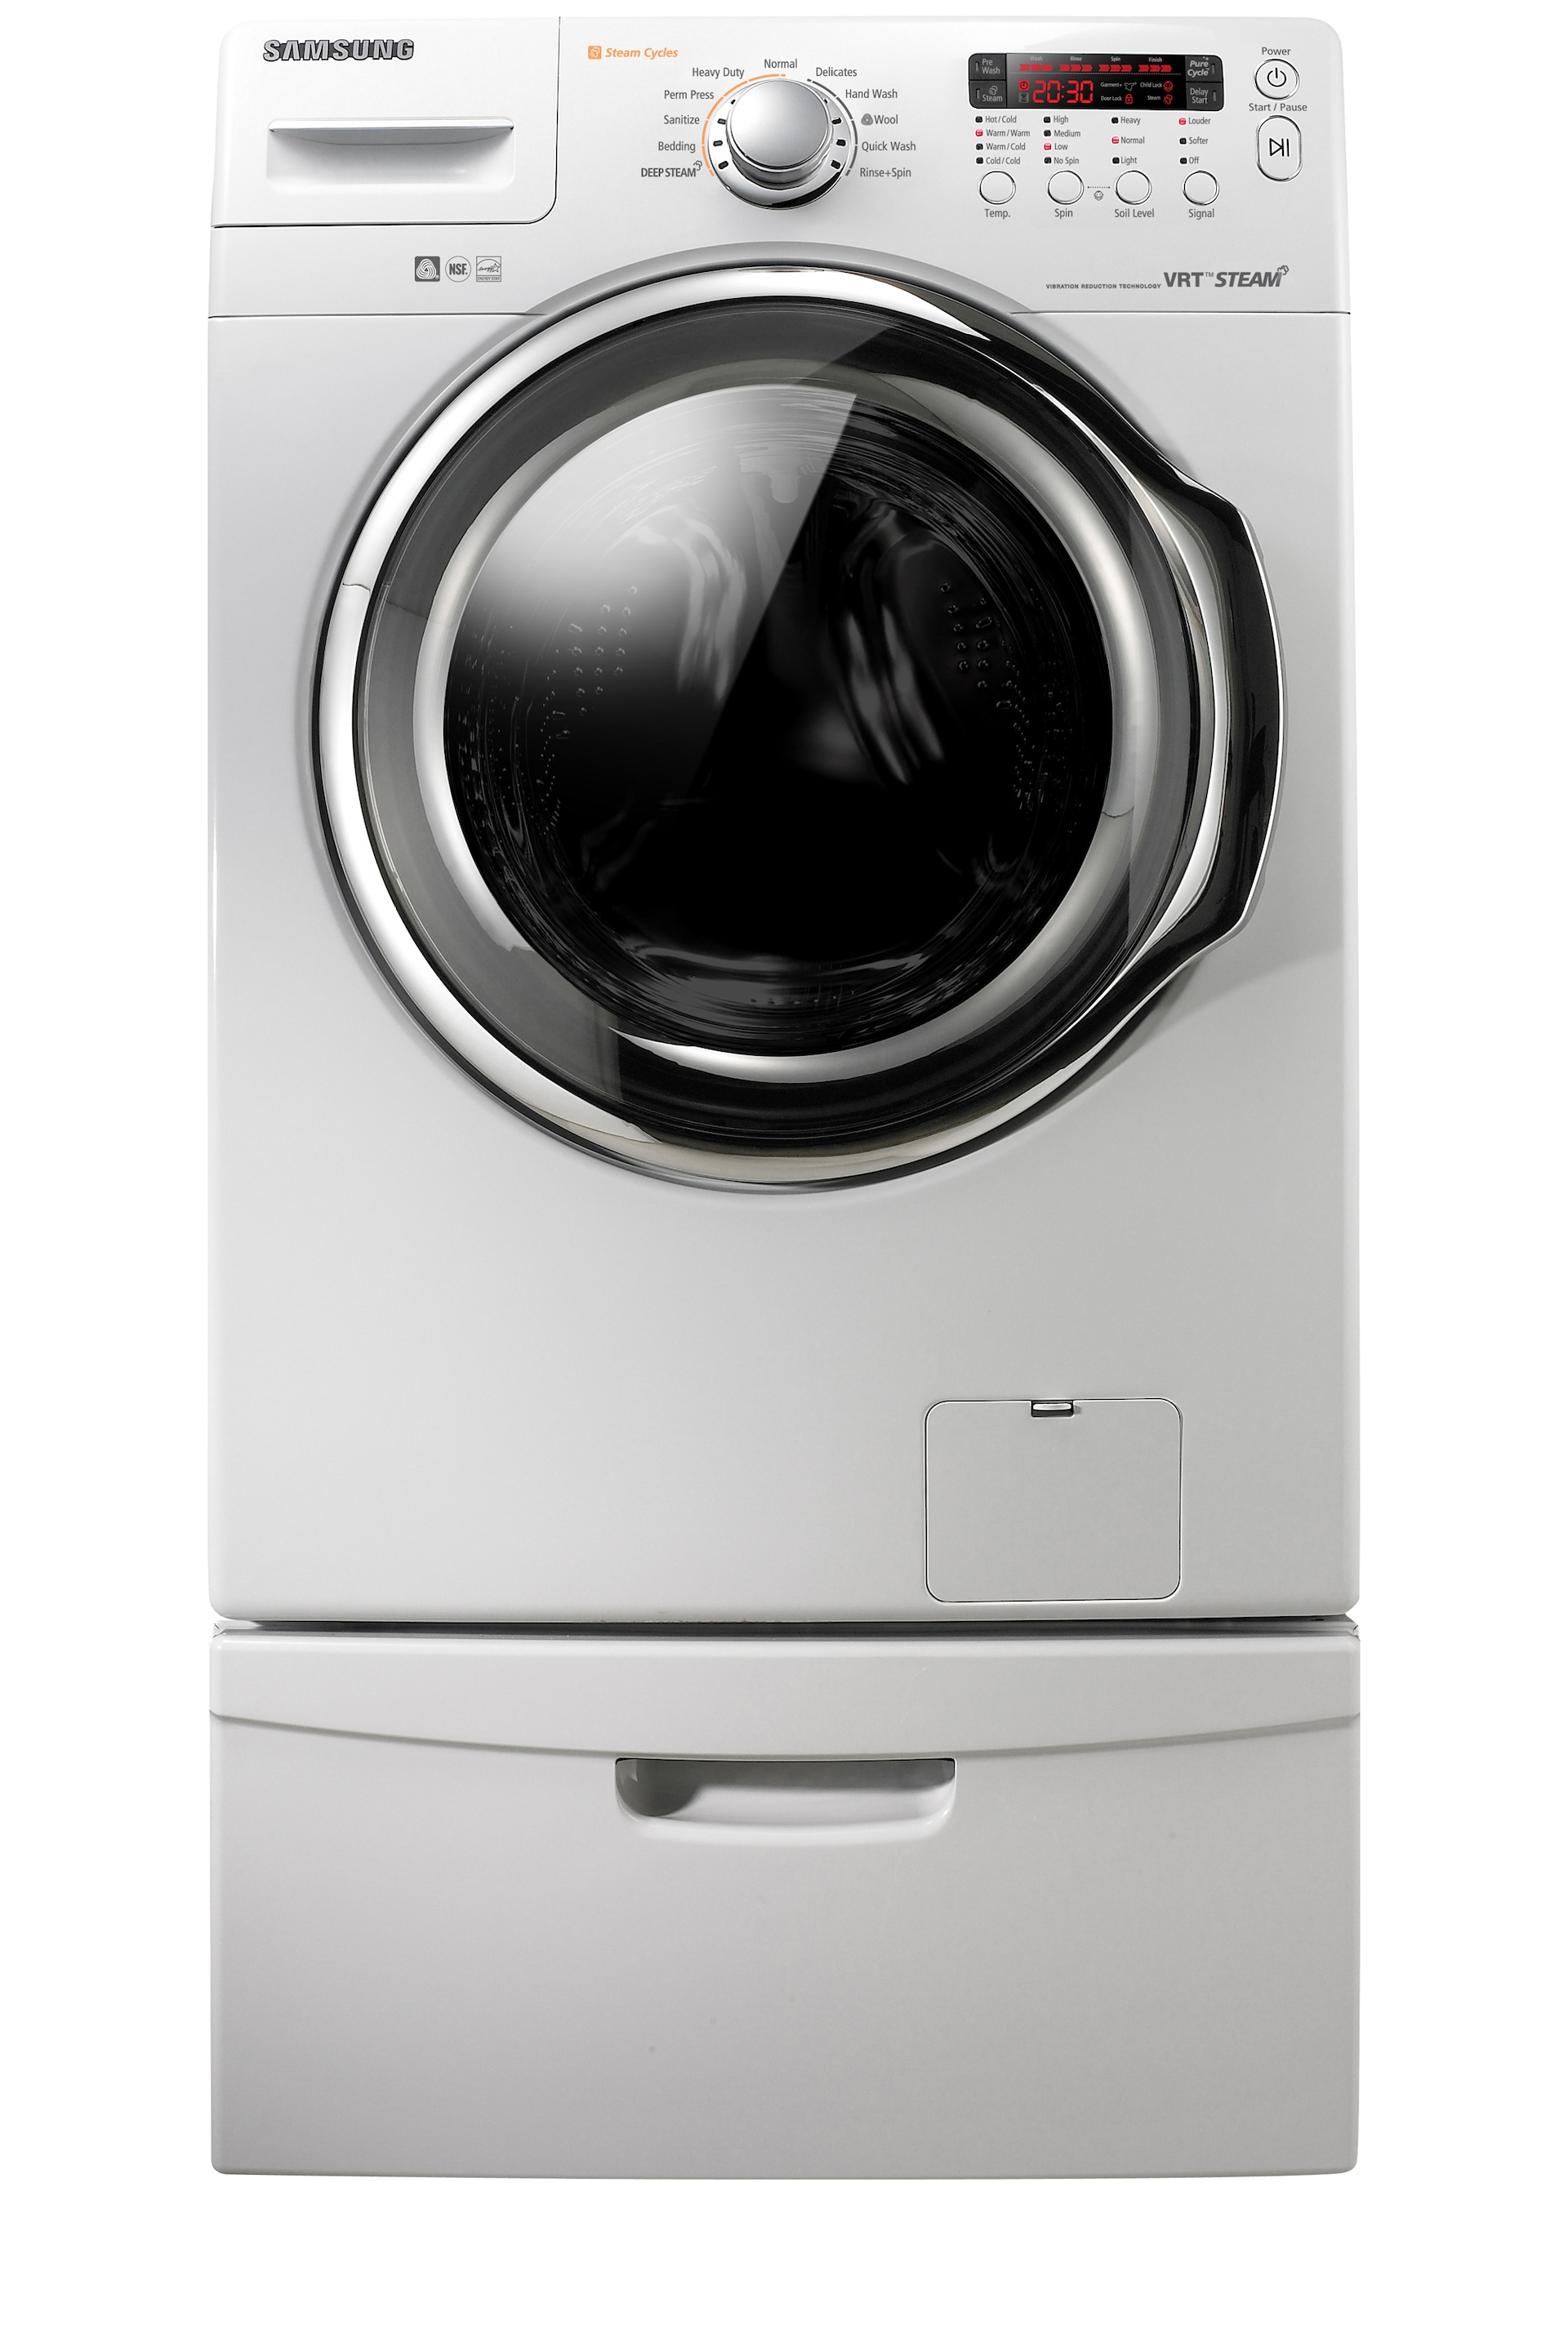 WF331ANW 4.3 cu. ft. Front Load Washer White | SAMSUNG Canada